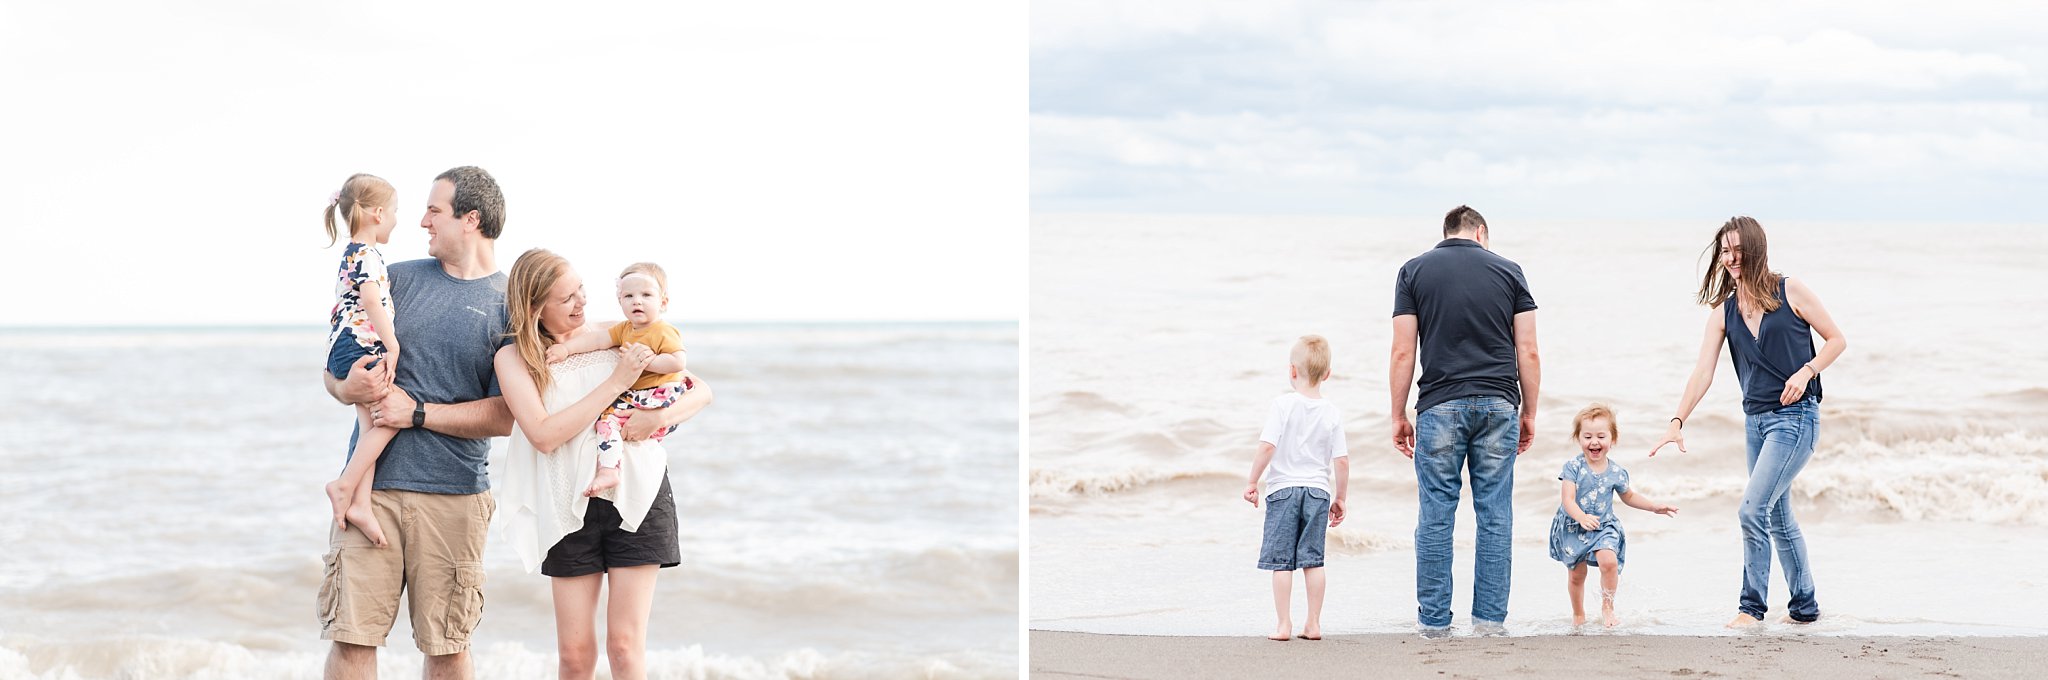 a little girl in a blue dress runs away from waves at the beach and her mother in a blue shirt and blue jeans chases her. the father and little boy stand looking at the water and cloudy sky. family photography london ontario